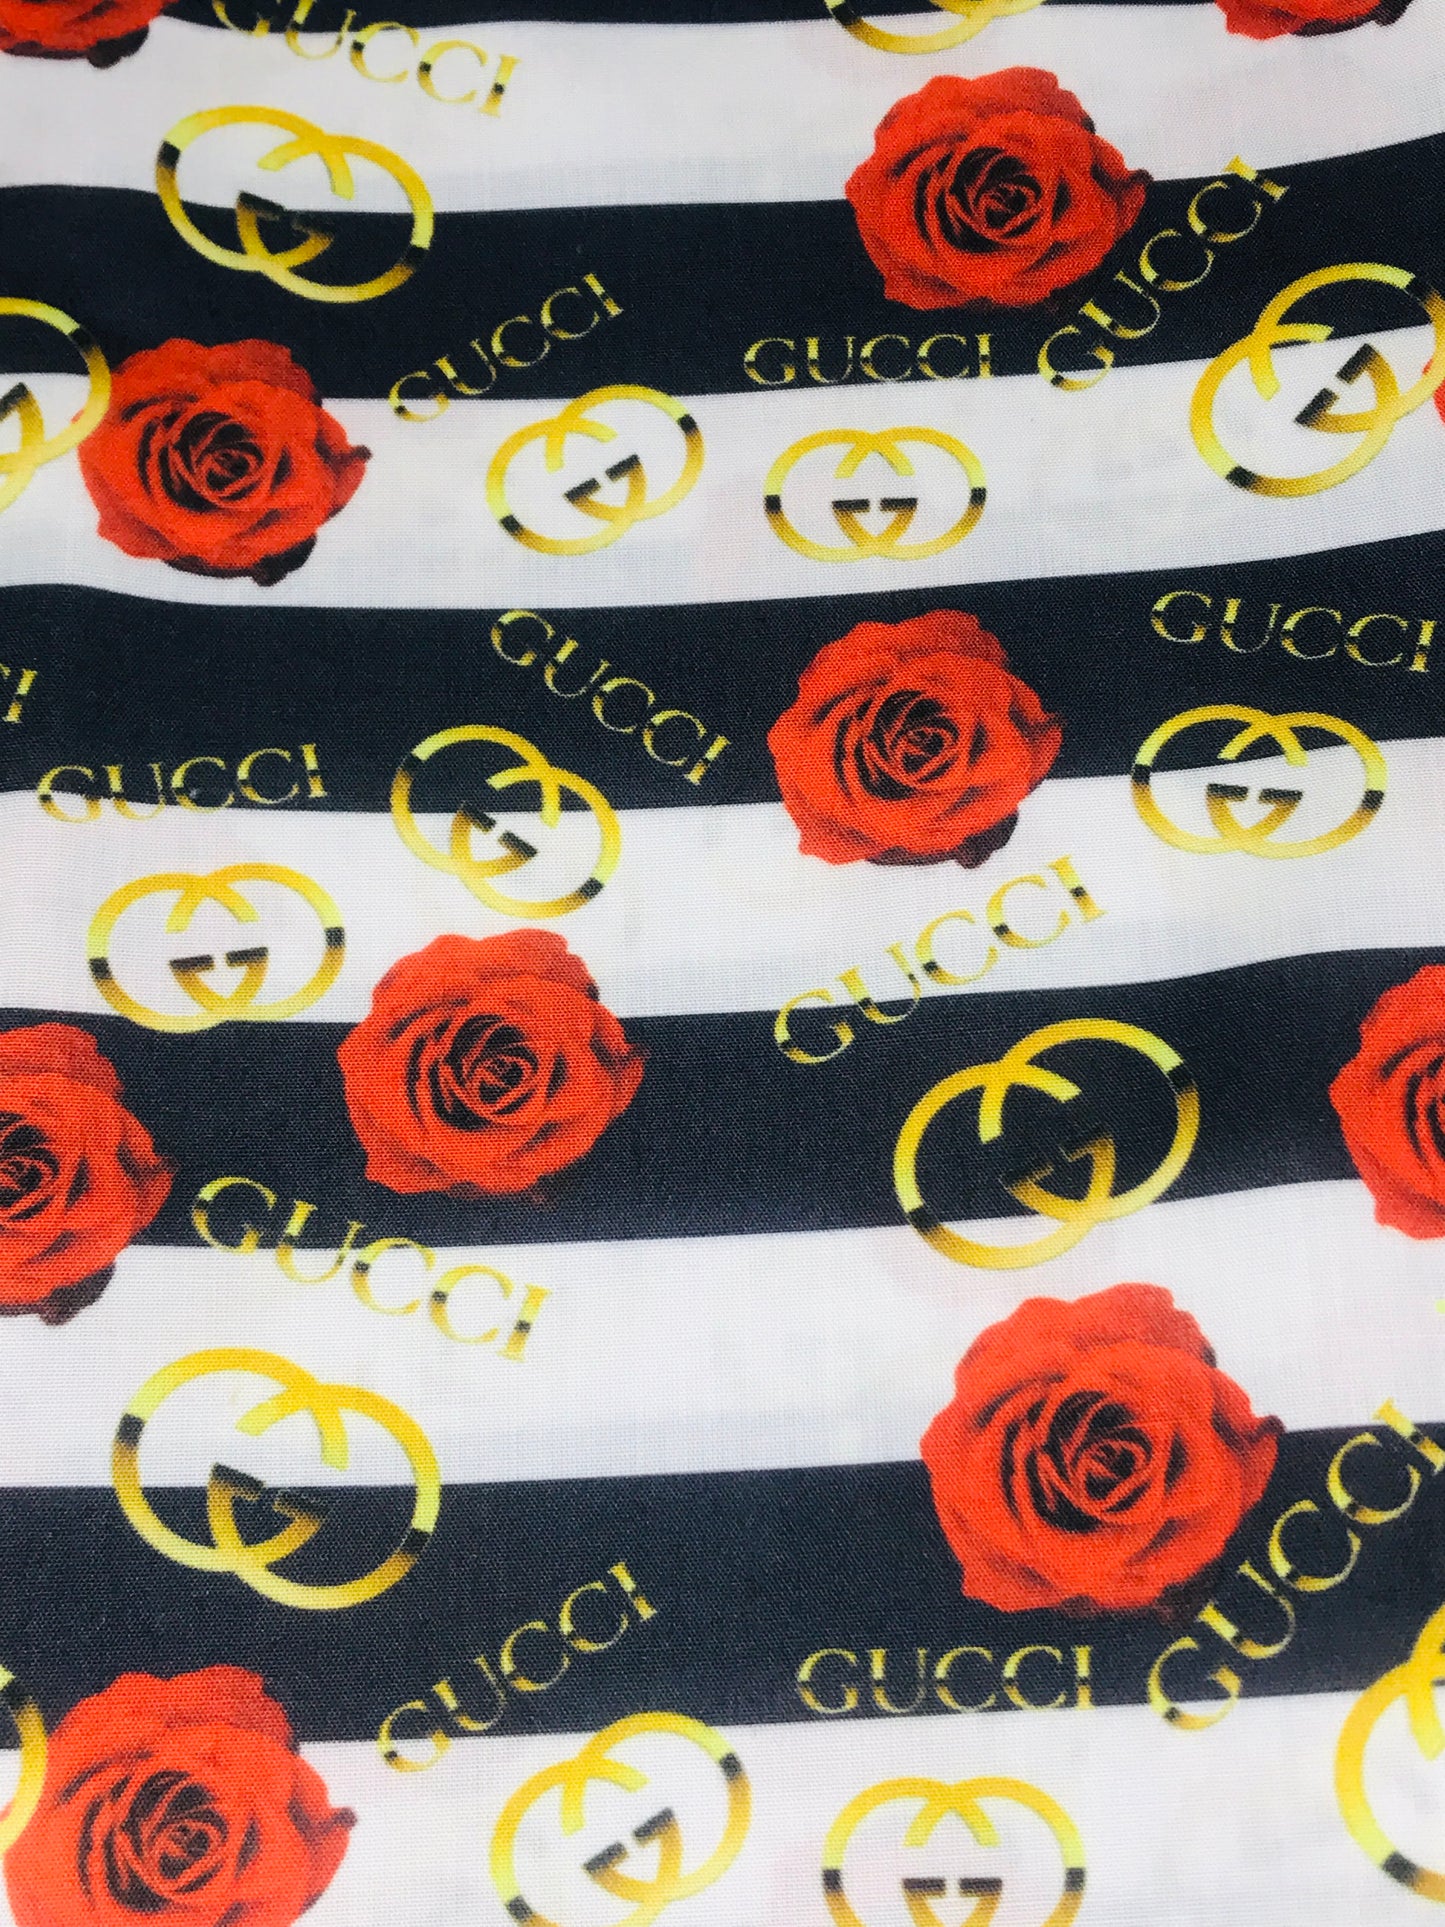 Gucci Black & White Stripes With Red Roses Fabric